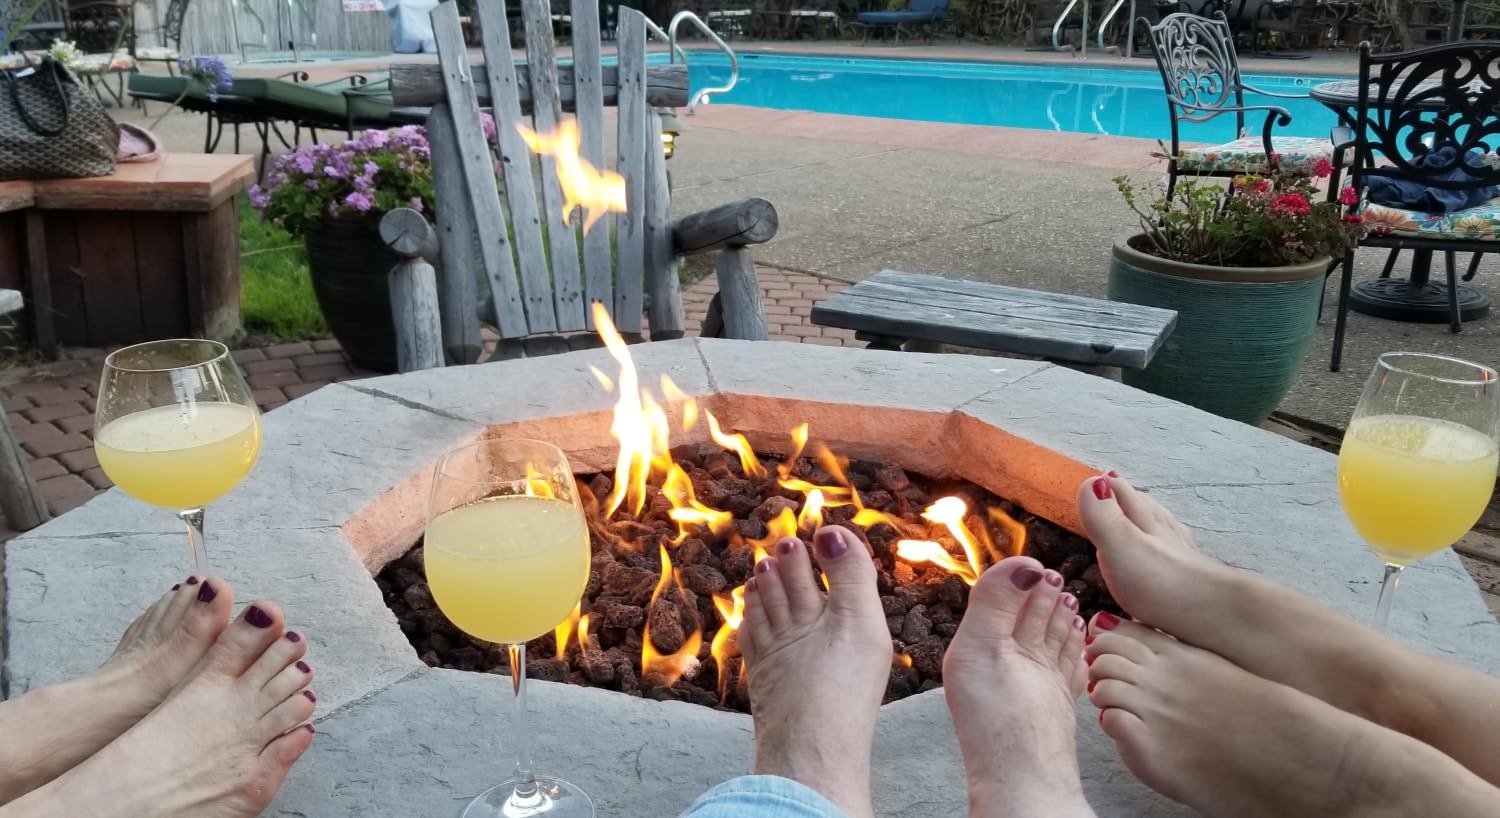 Three ladies feet with painted toe nails resting on firepit with wine glasses overlooking a fire near the pool